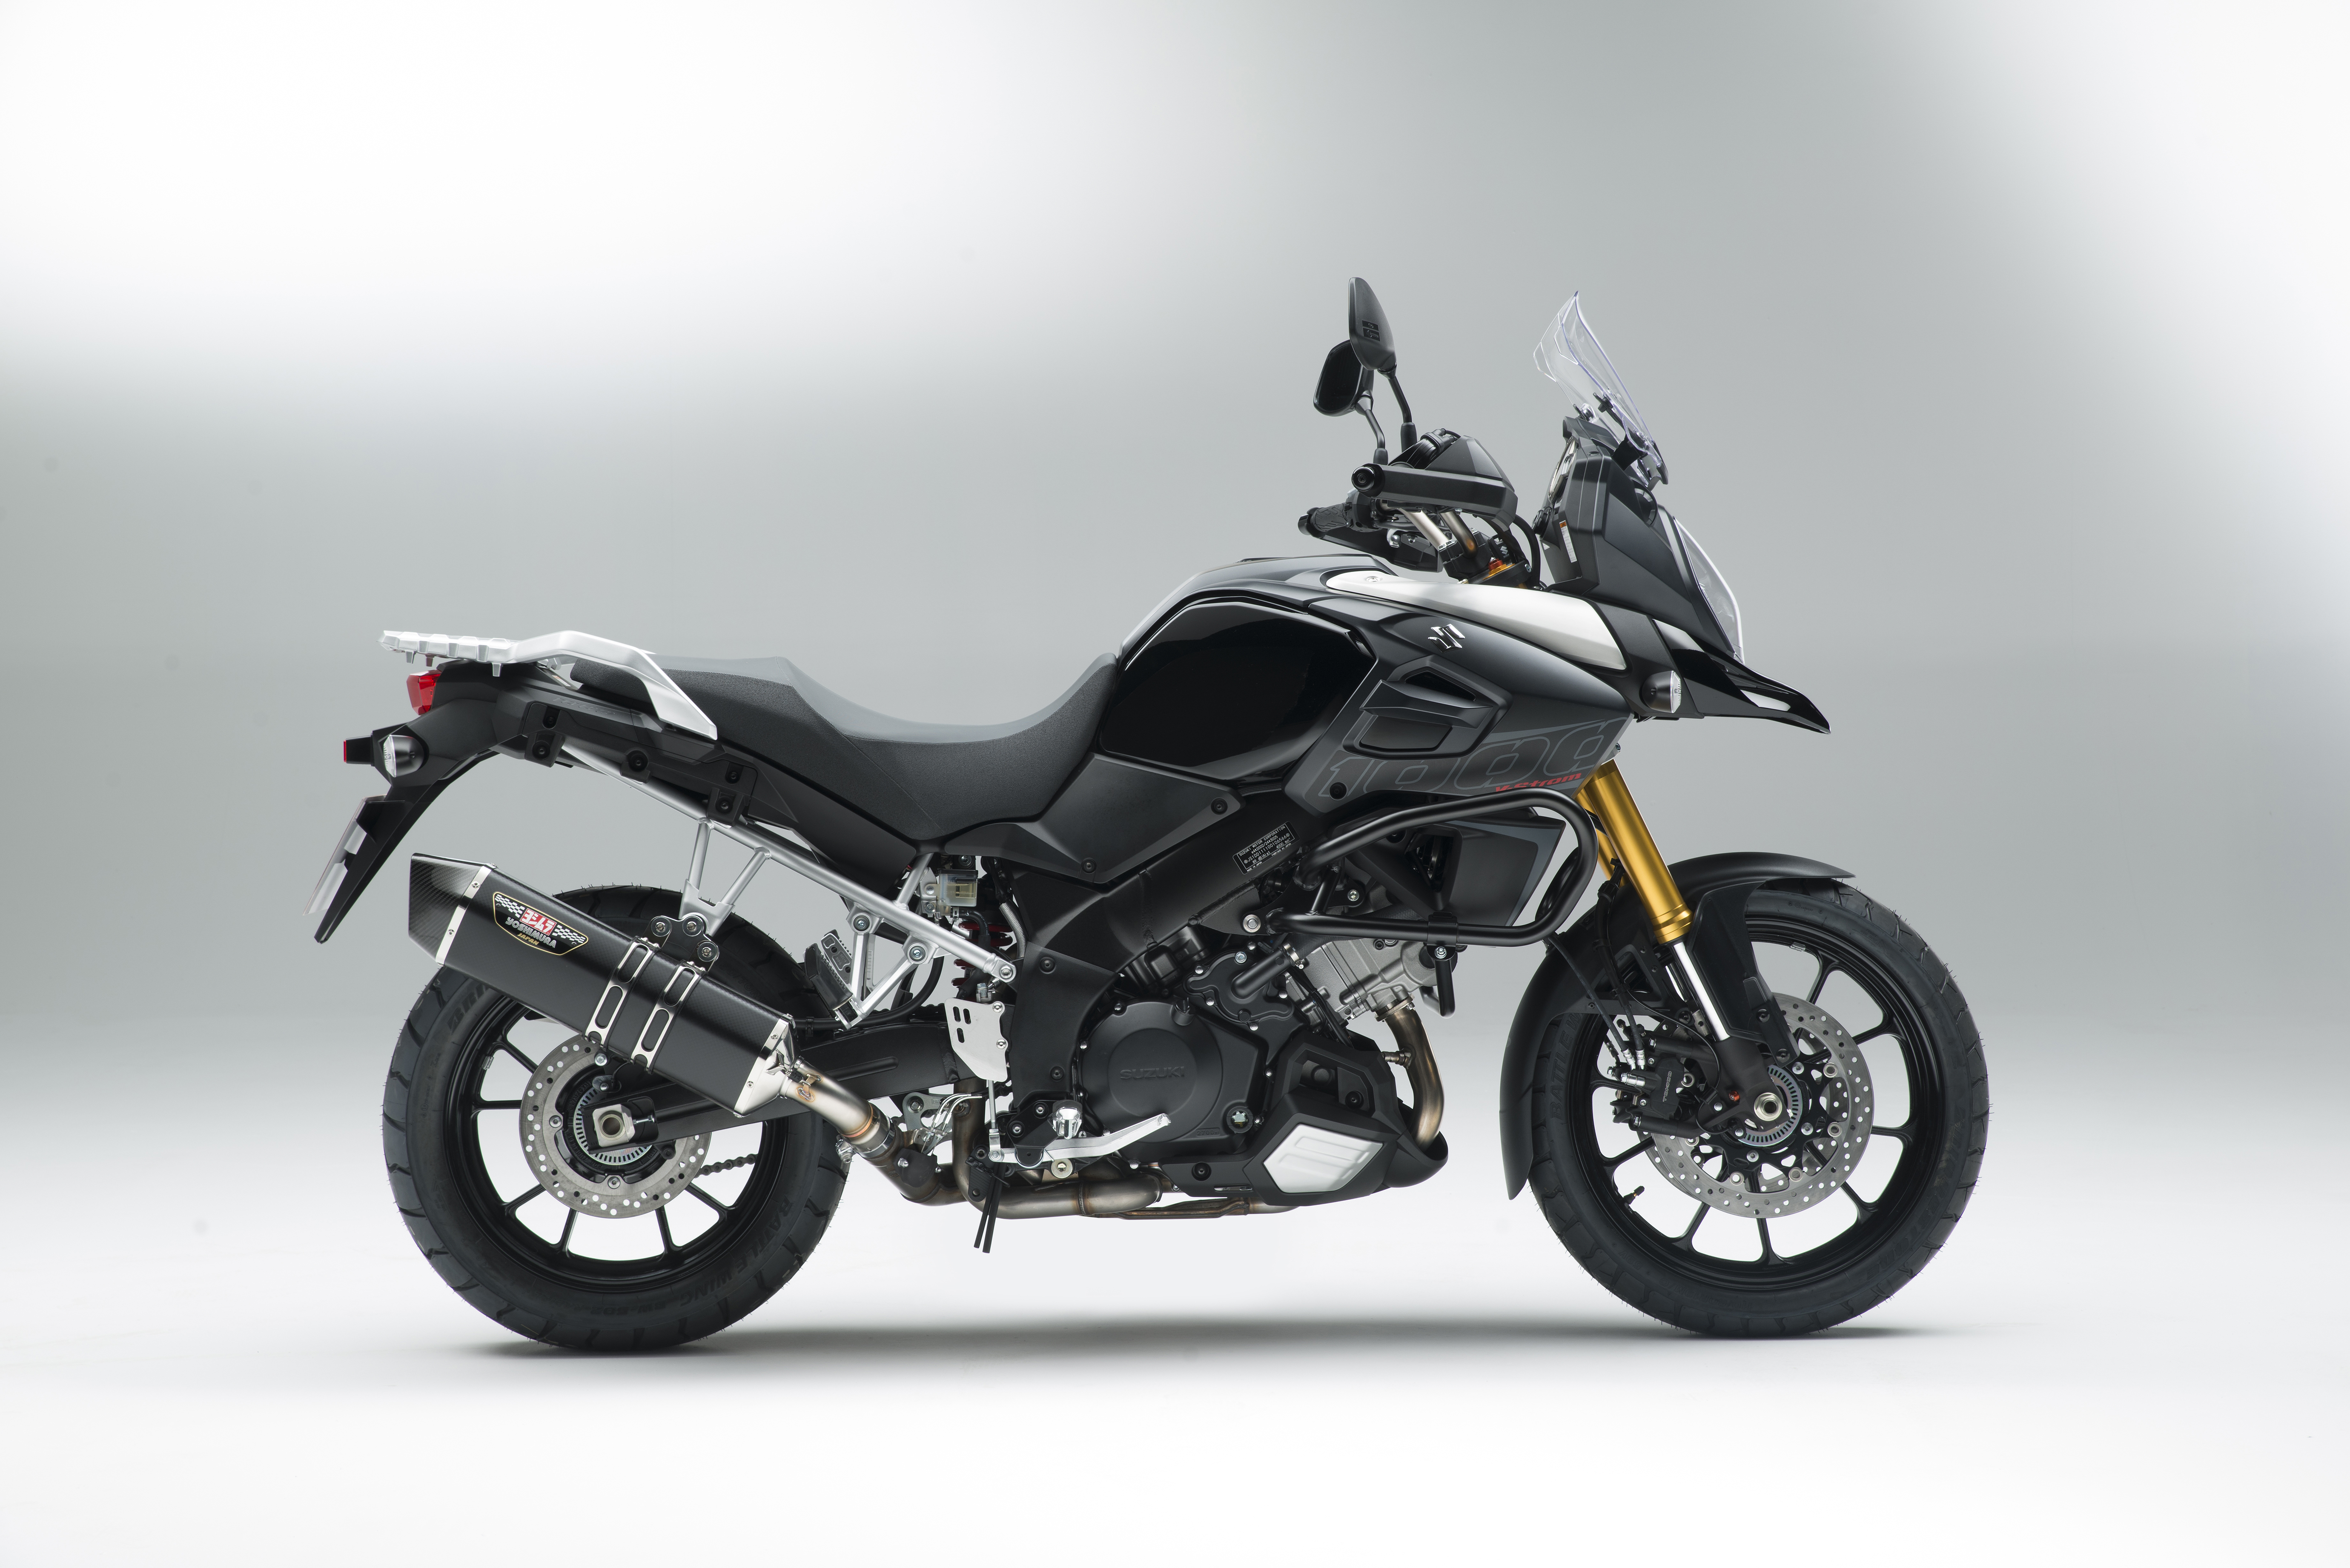 Sport version of the V-Strom 1000 is now in dealerships